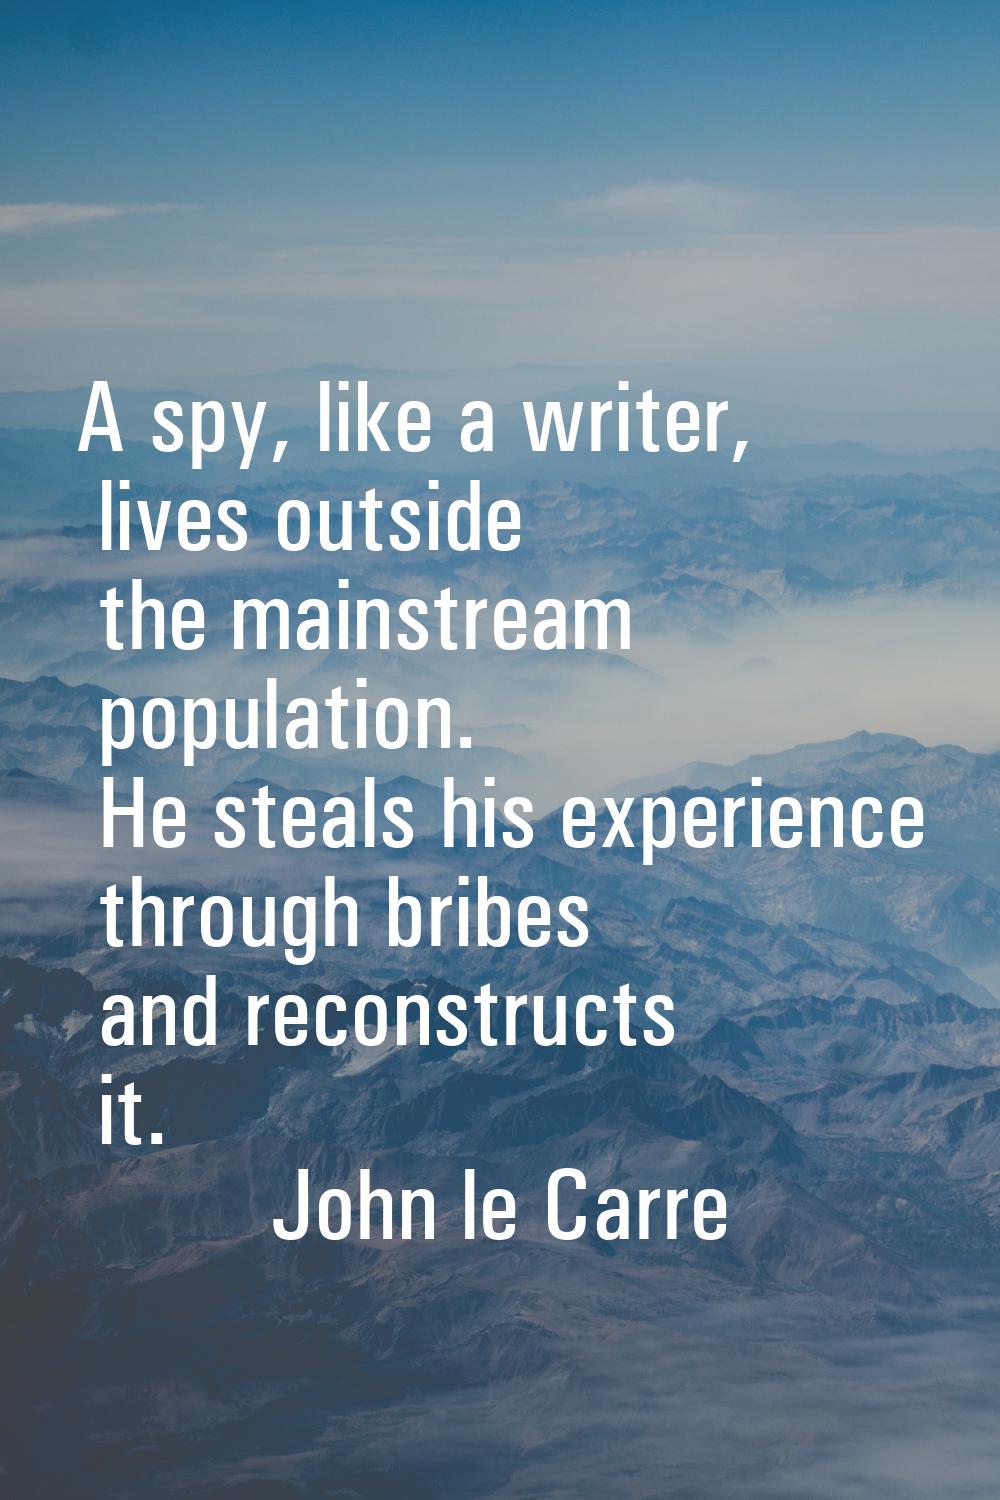 A spy, like a writer, lives outside the mainstream population. He steals his experience through bri